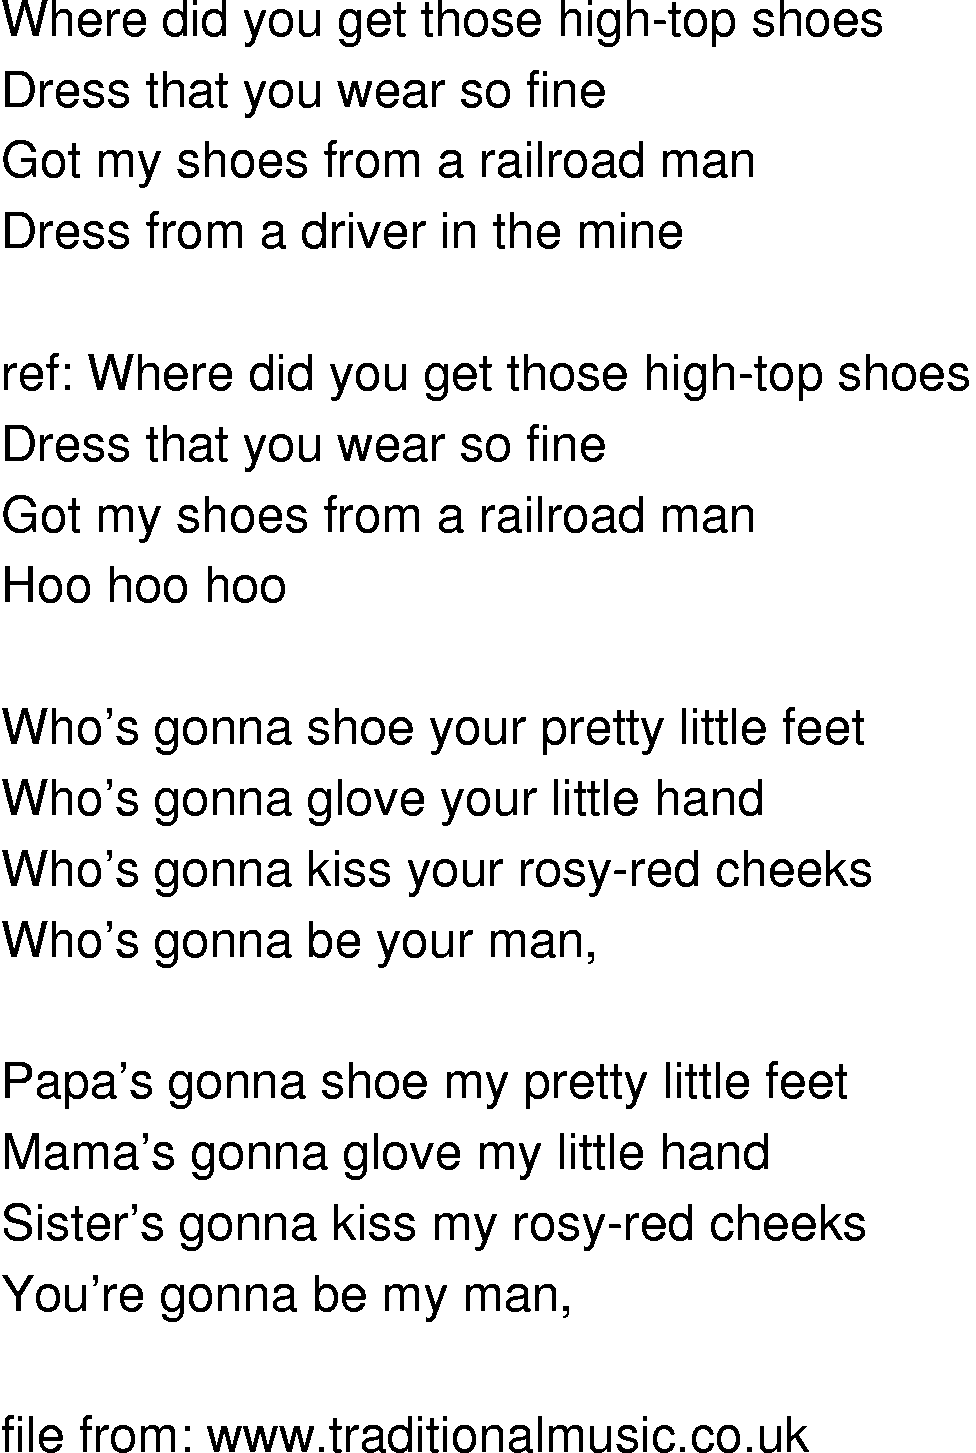 Old-Time (oldtimey) Song Lyrics - whos gonna shoe your pretty little feet